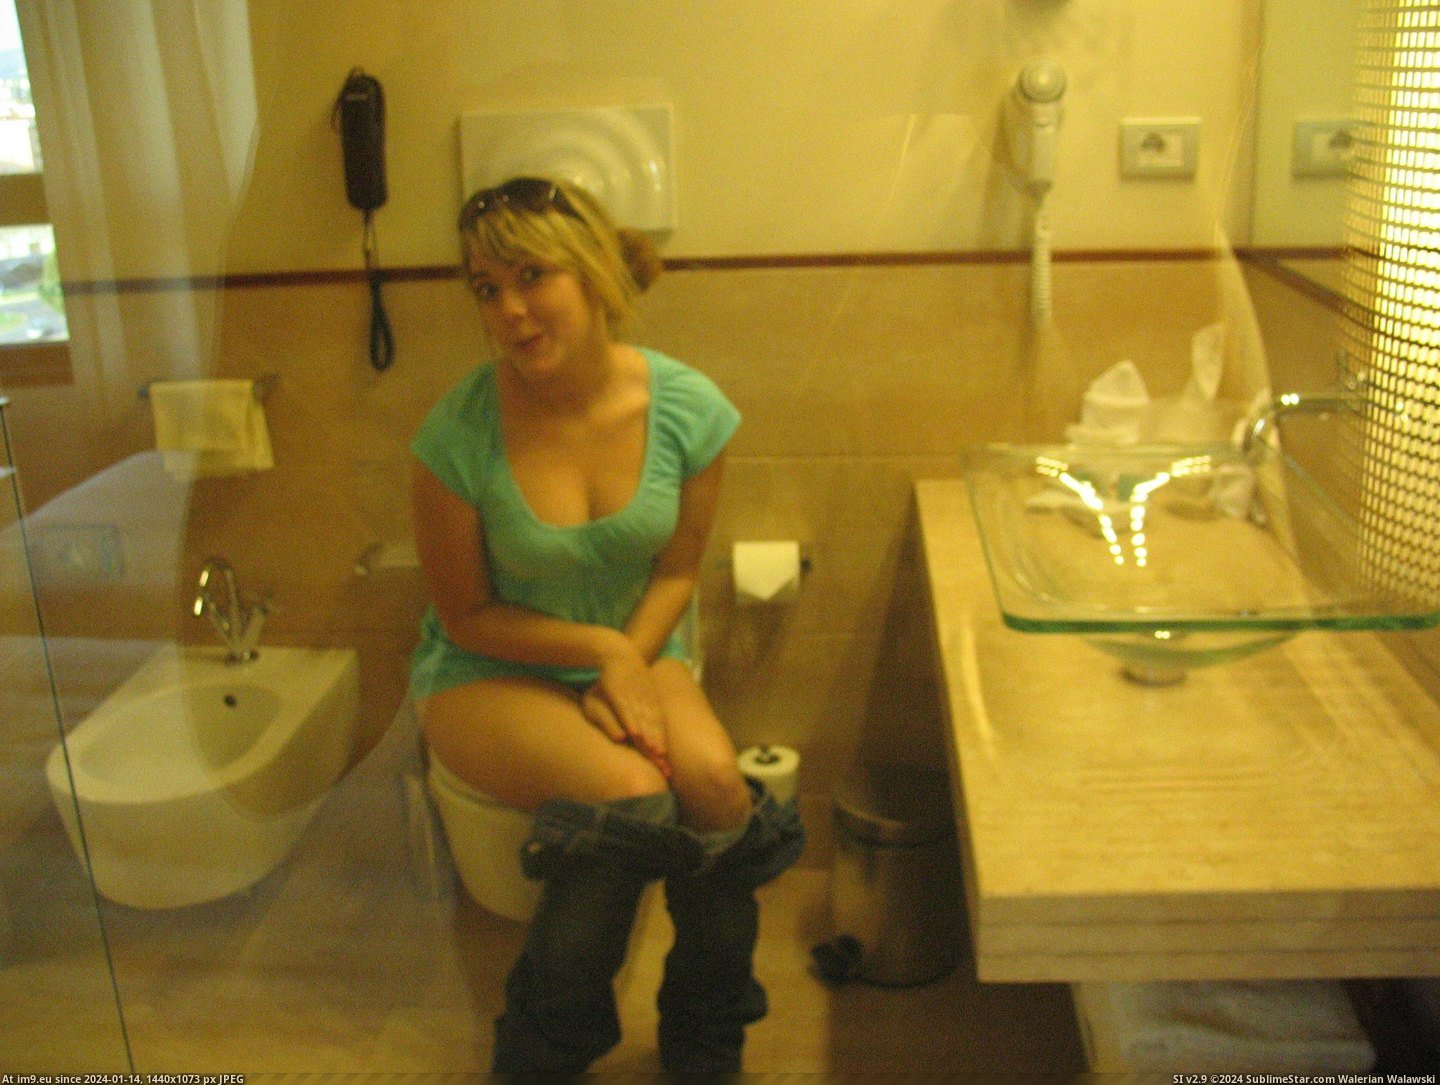 #Porn #Girls #Teen #Toilet #Bowl #Toilets #Young #Peeing #Pissing Young Teen Girls Pissing On Toilets 26 (WC toilet bowl peeing porn) Pic. (Obraz z album Teen Girls Pissing Porn (Young Teens Toilet Peeing)))